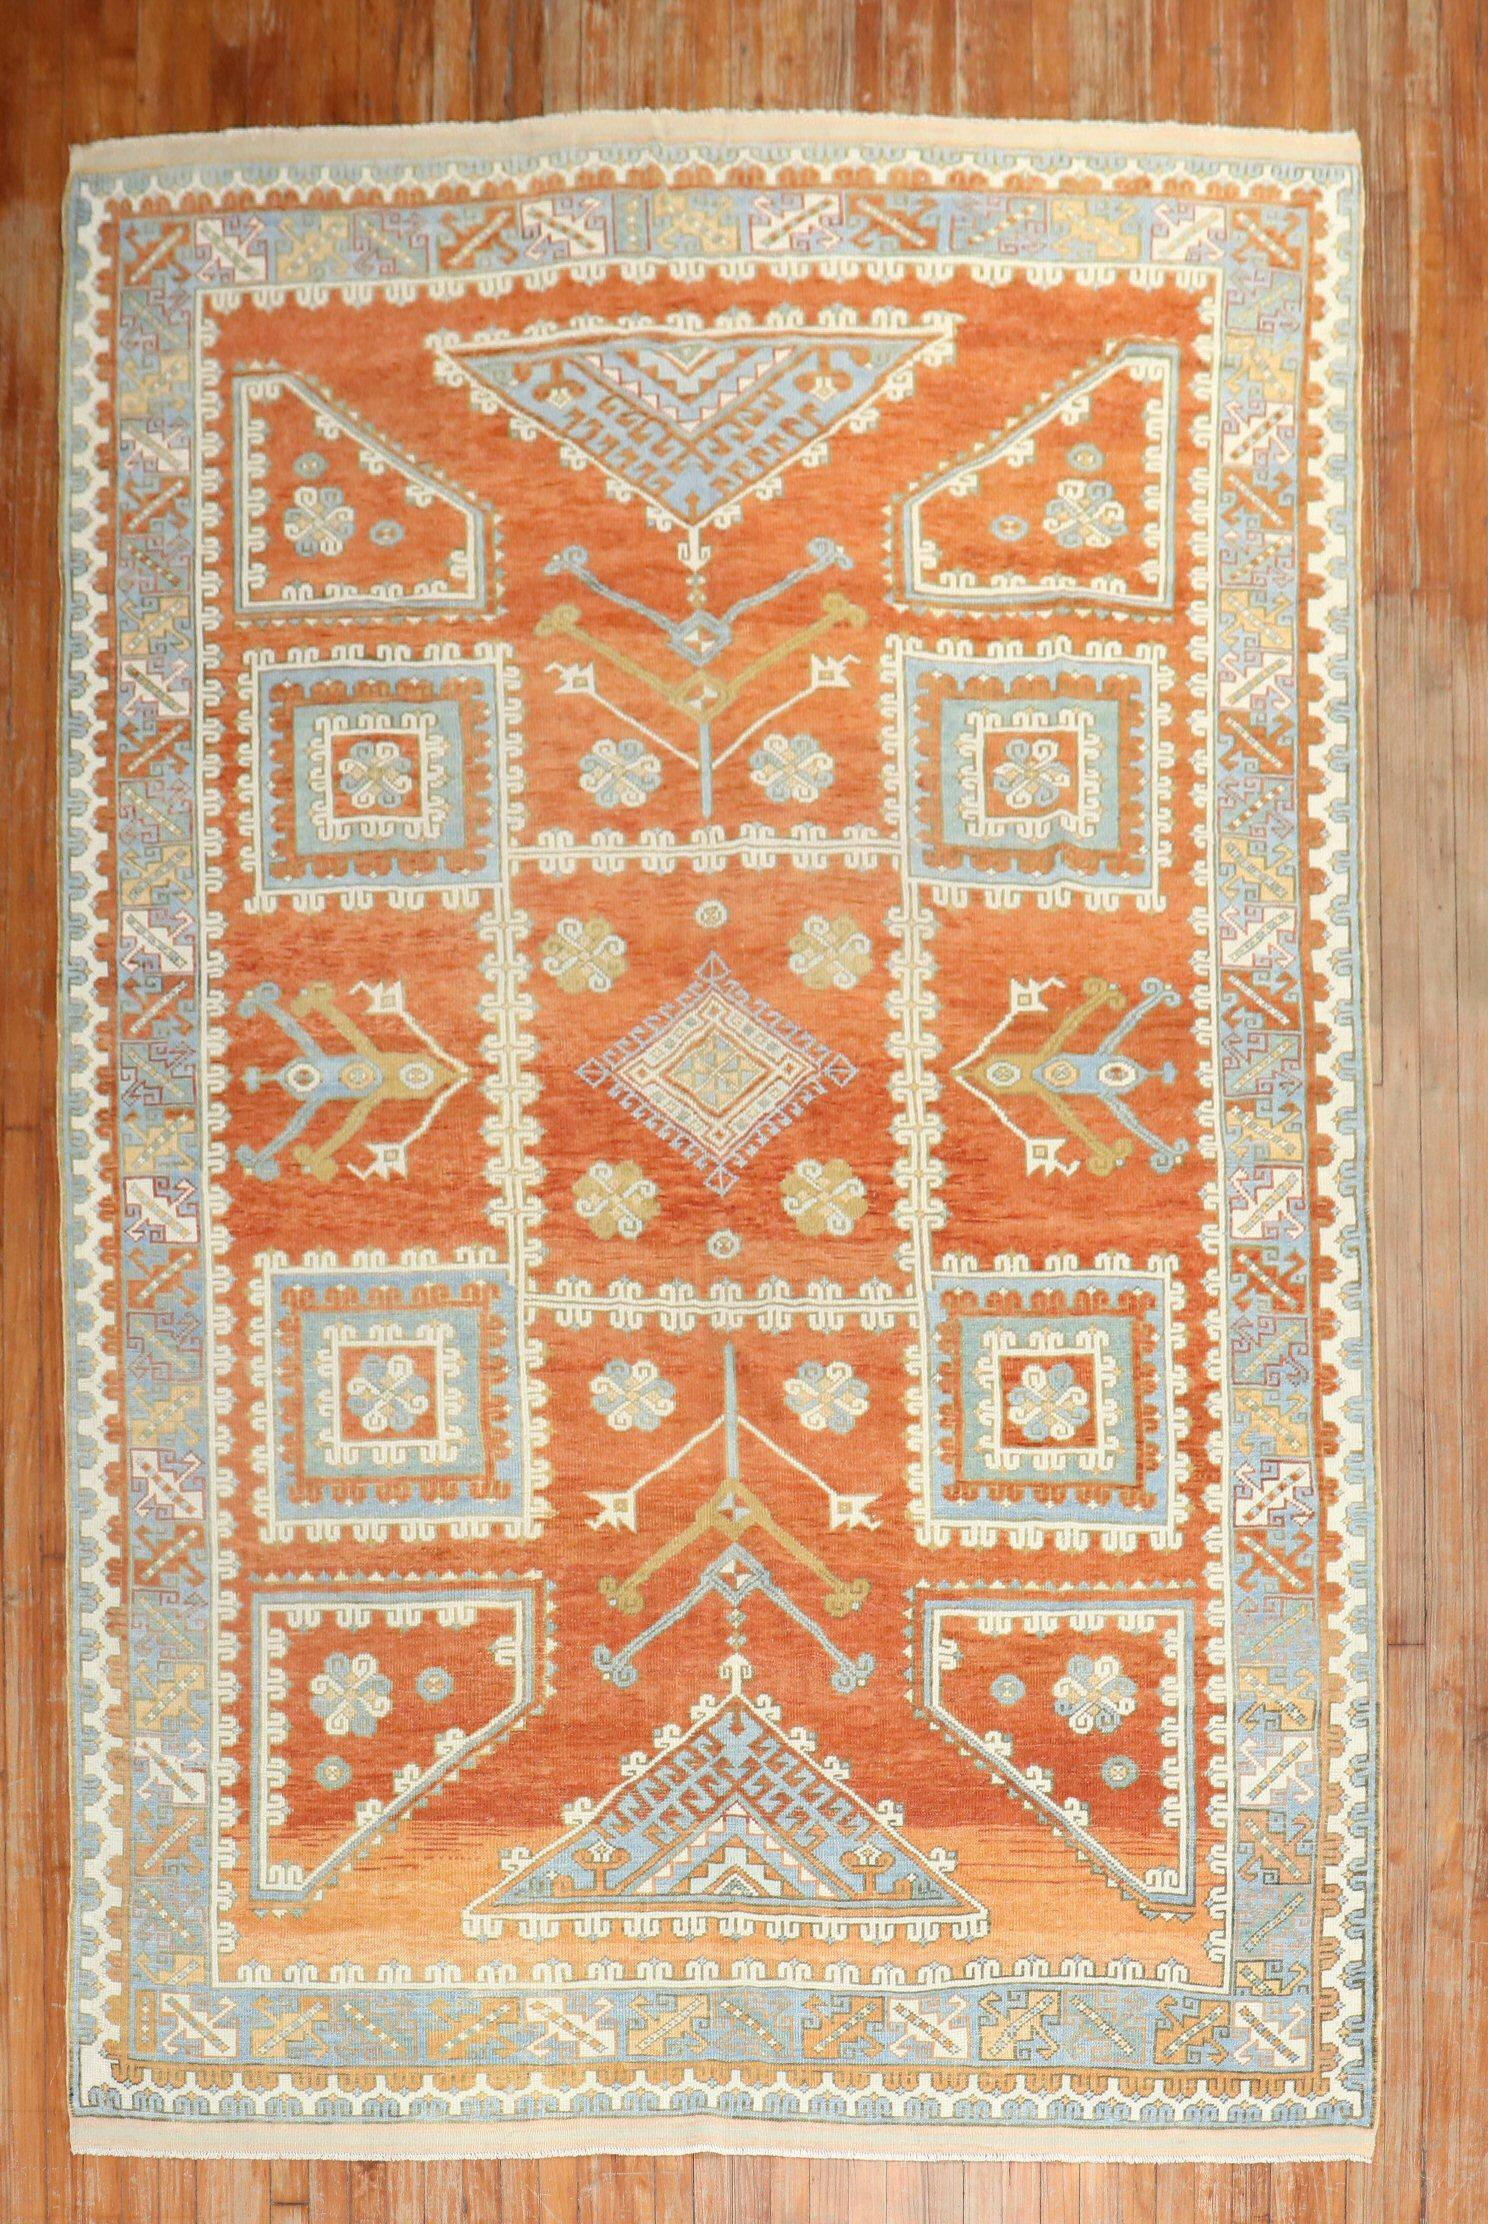 Mid-20th Century Turkish Rug in orange with a design found in 19th century Bergama Rugs

Measures: 6'7''x 10'2''.